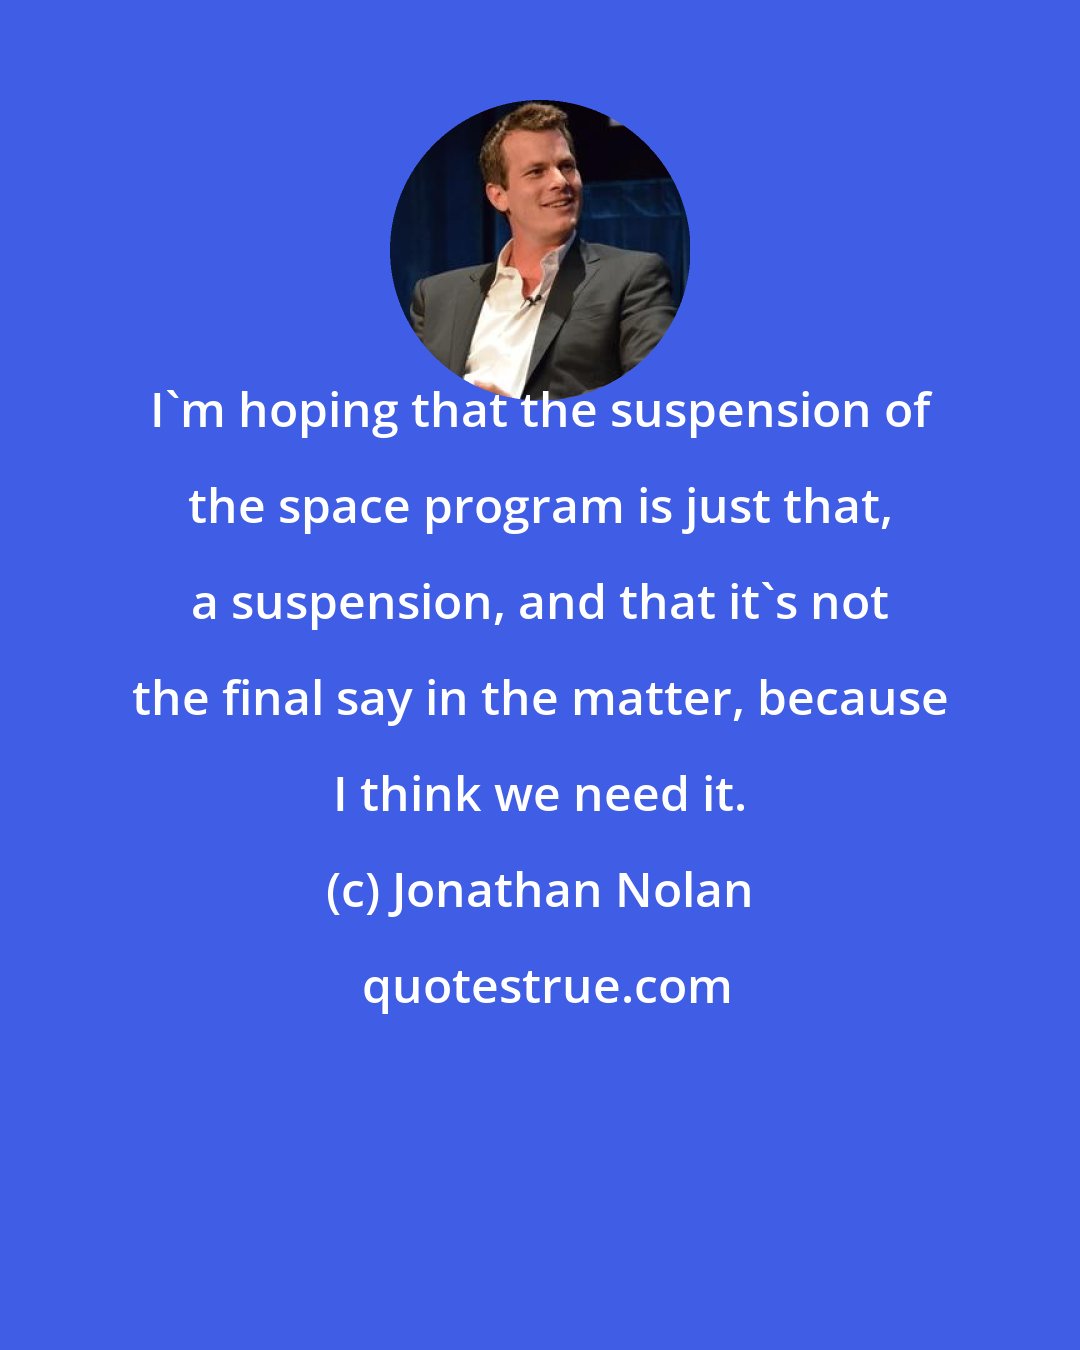 Jonathan Nolan: I'm hoping that the suspension of the space program is just that, a suspension, and that it's not the final say in the matter, because I think we need it.